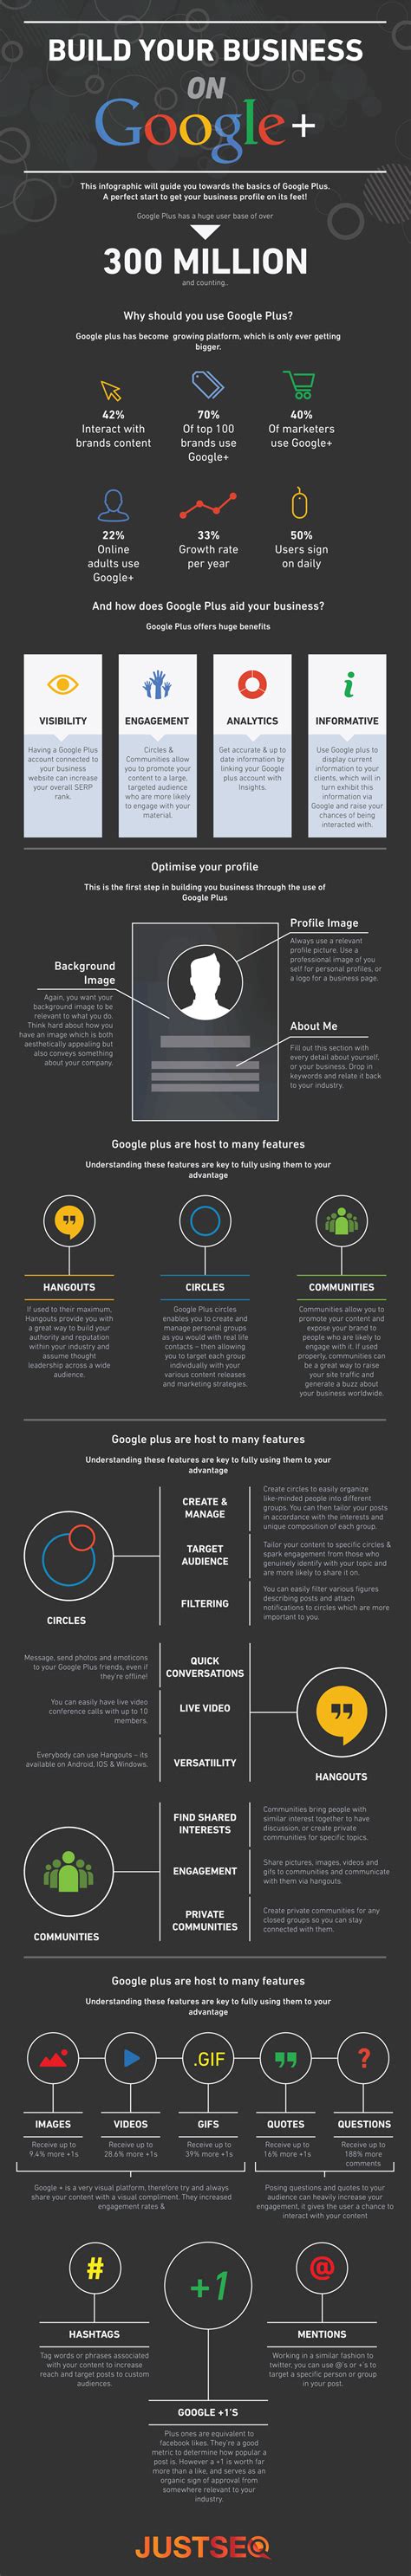 Imgur The Most Awesome Images On The Internet Infographic Marketing